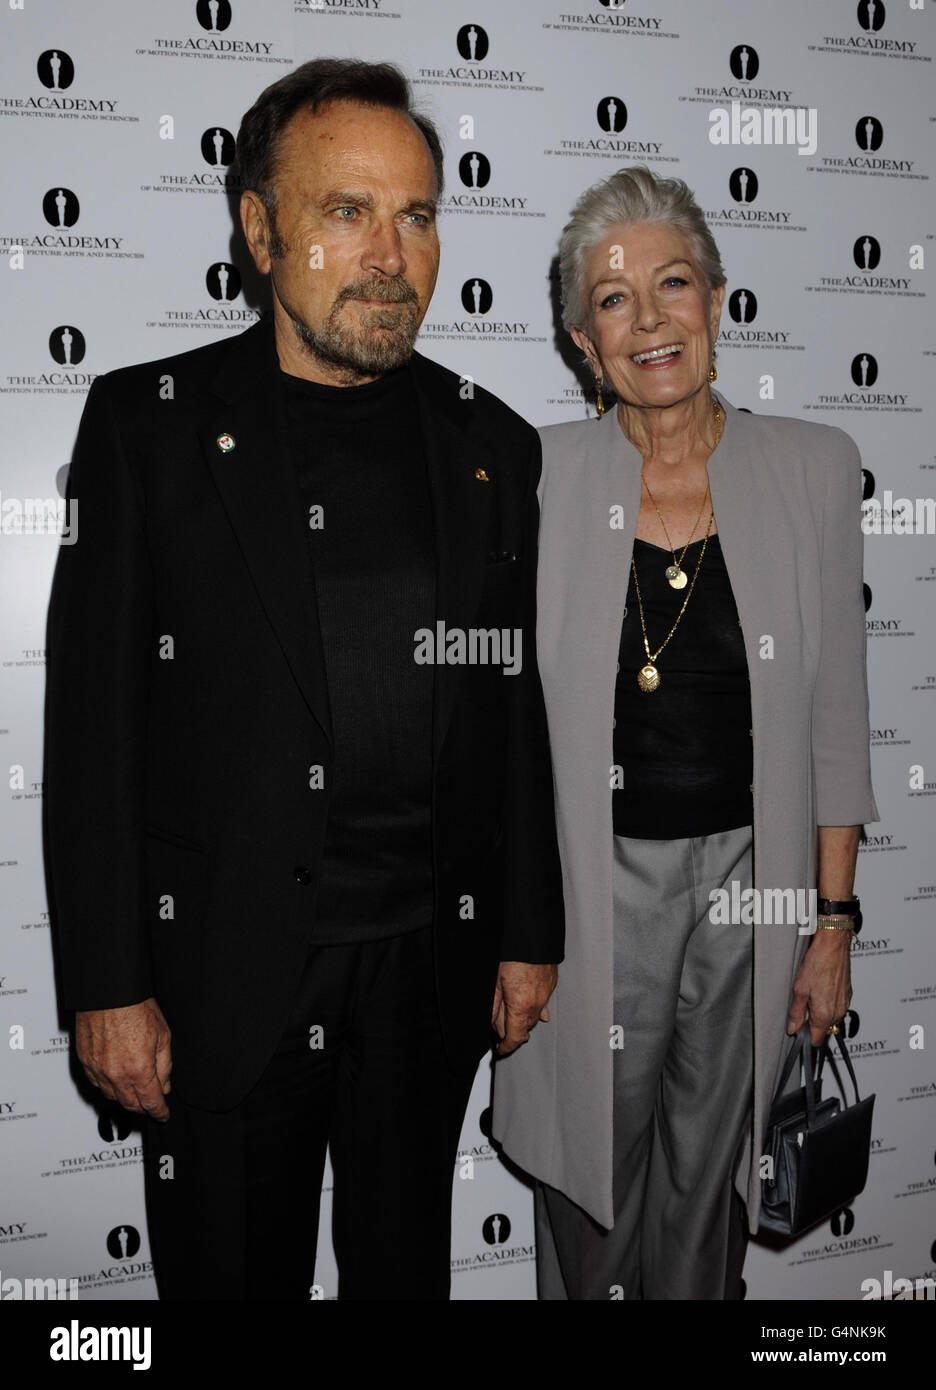 Franco Nero and Vanessa Redgrave arrive at the Academy of Motion Picture Arts and Sciences tribute to Vanessa Redgrave at the Curzon Soho in London. Stock Photo